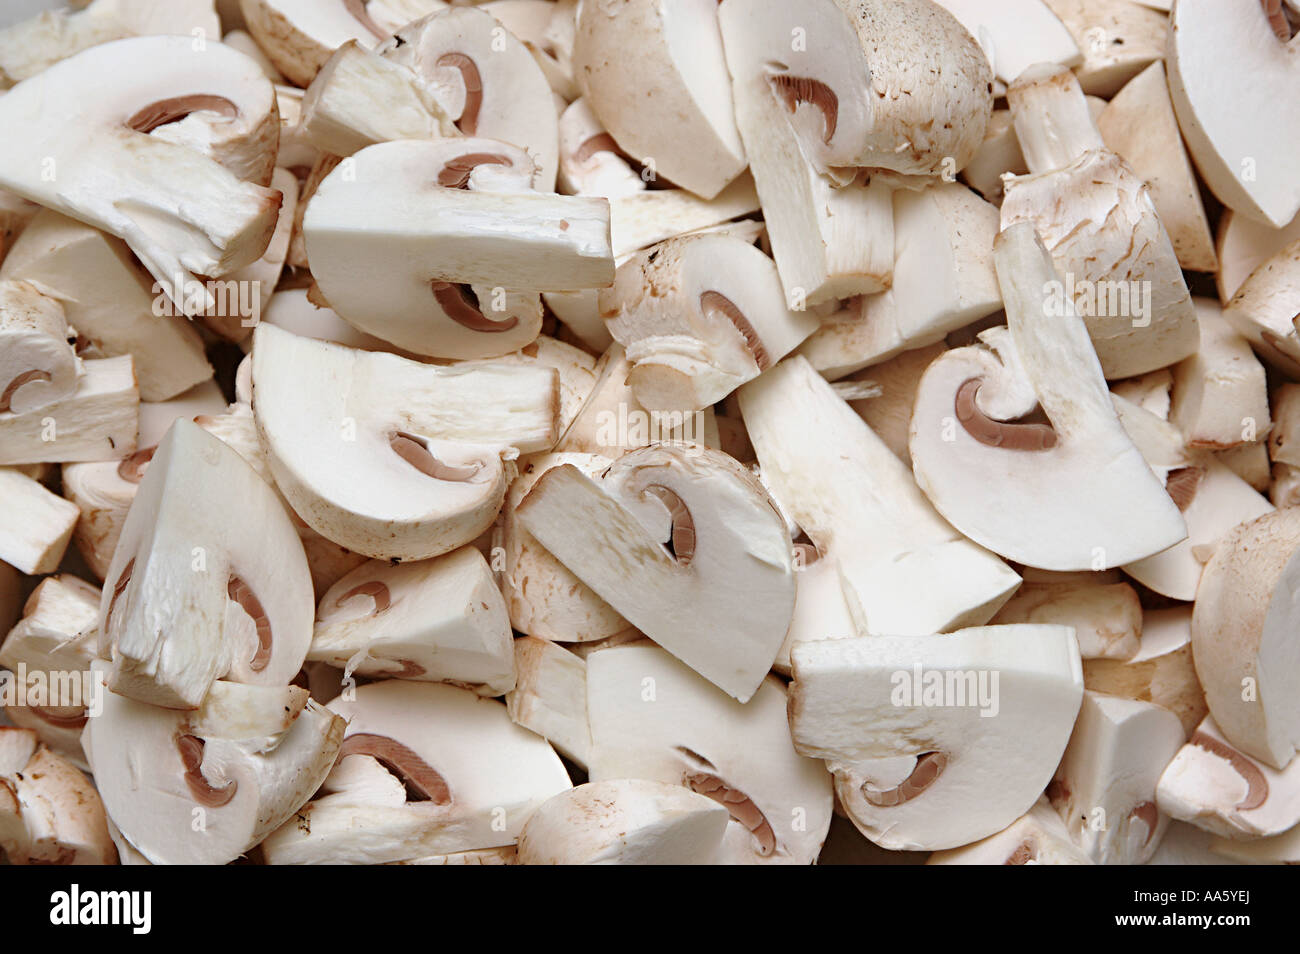 White button mushroom cut and chopped in shape Stock Photo